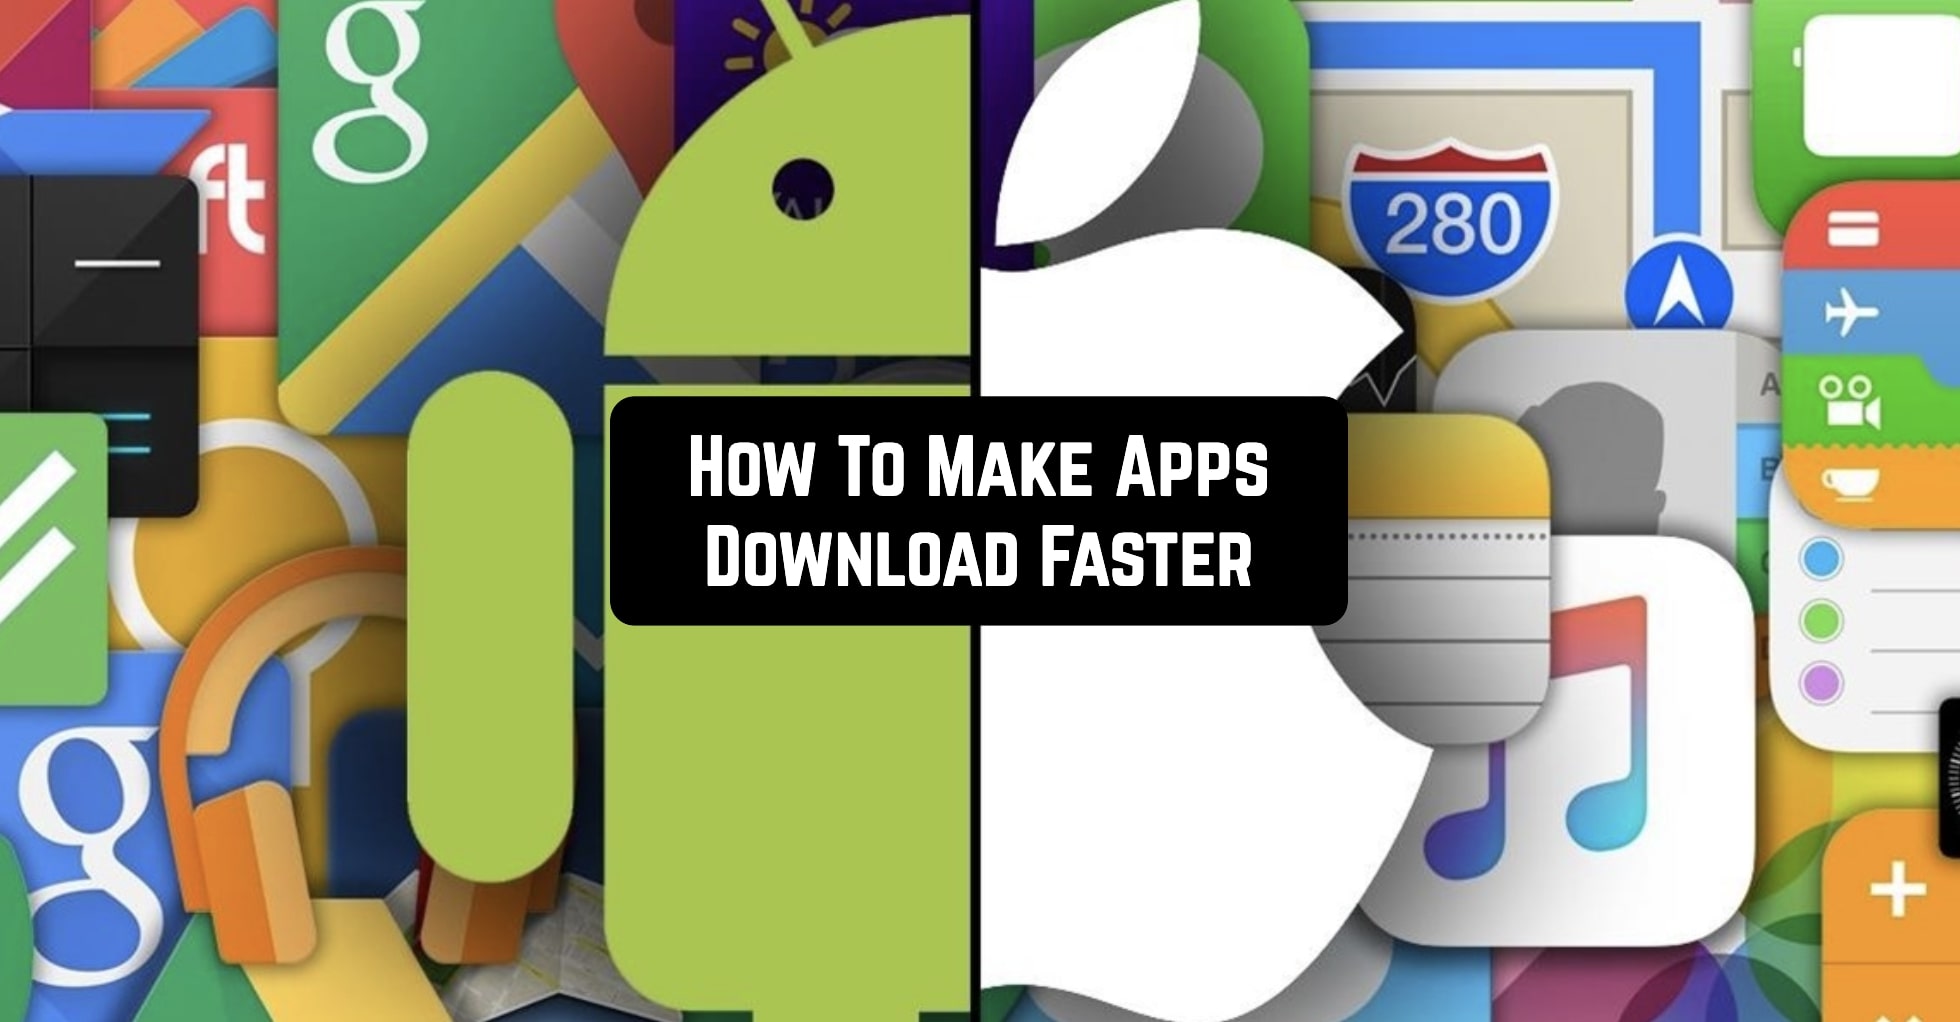 How To Make Apps Download Faster